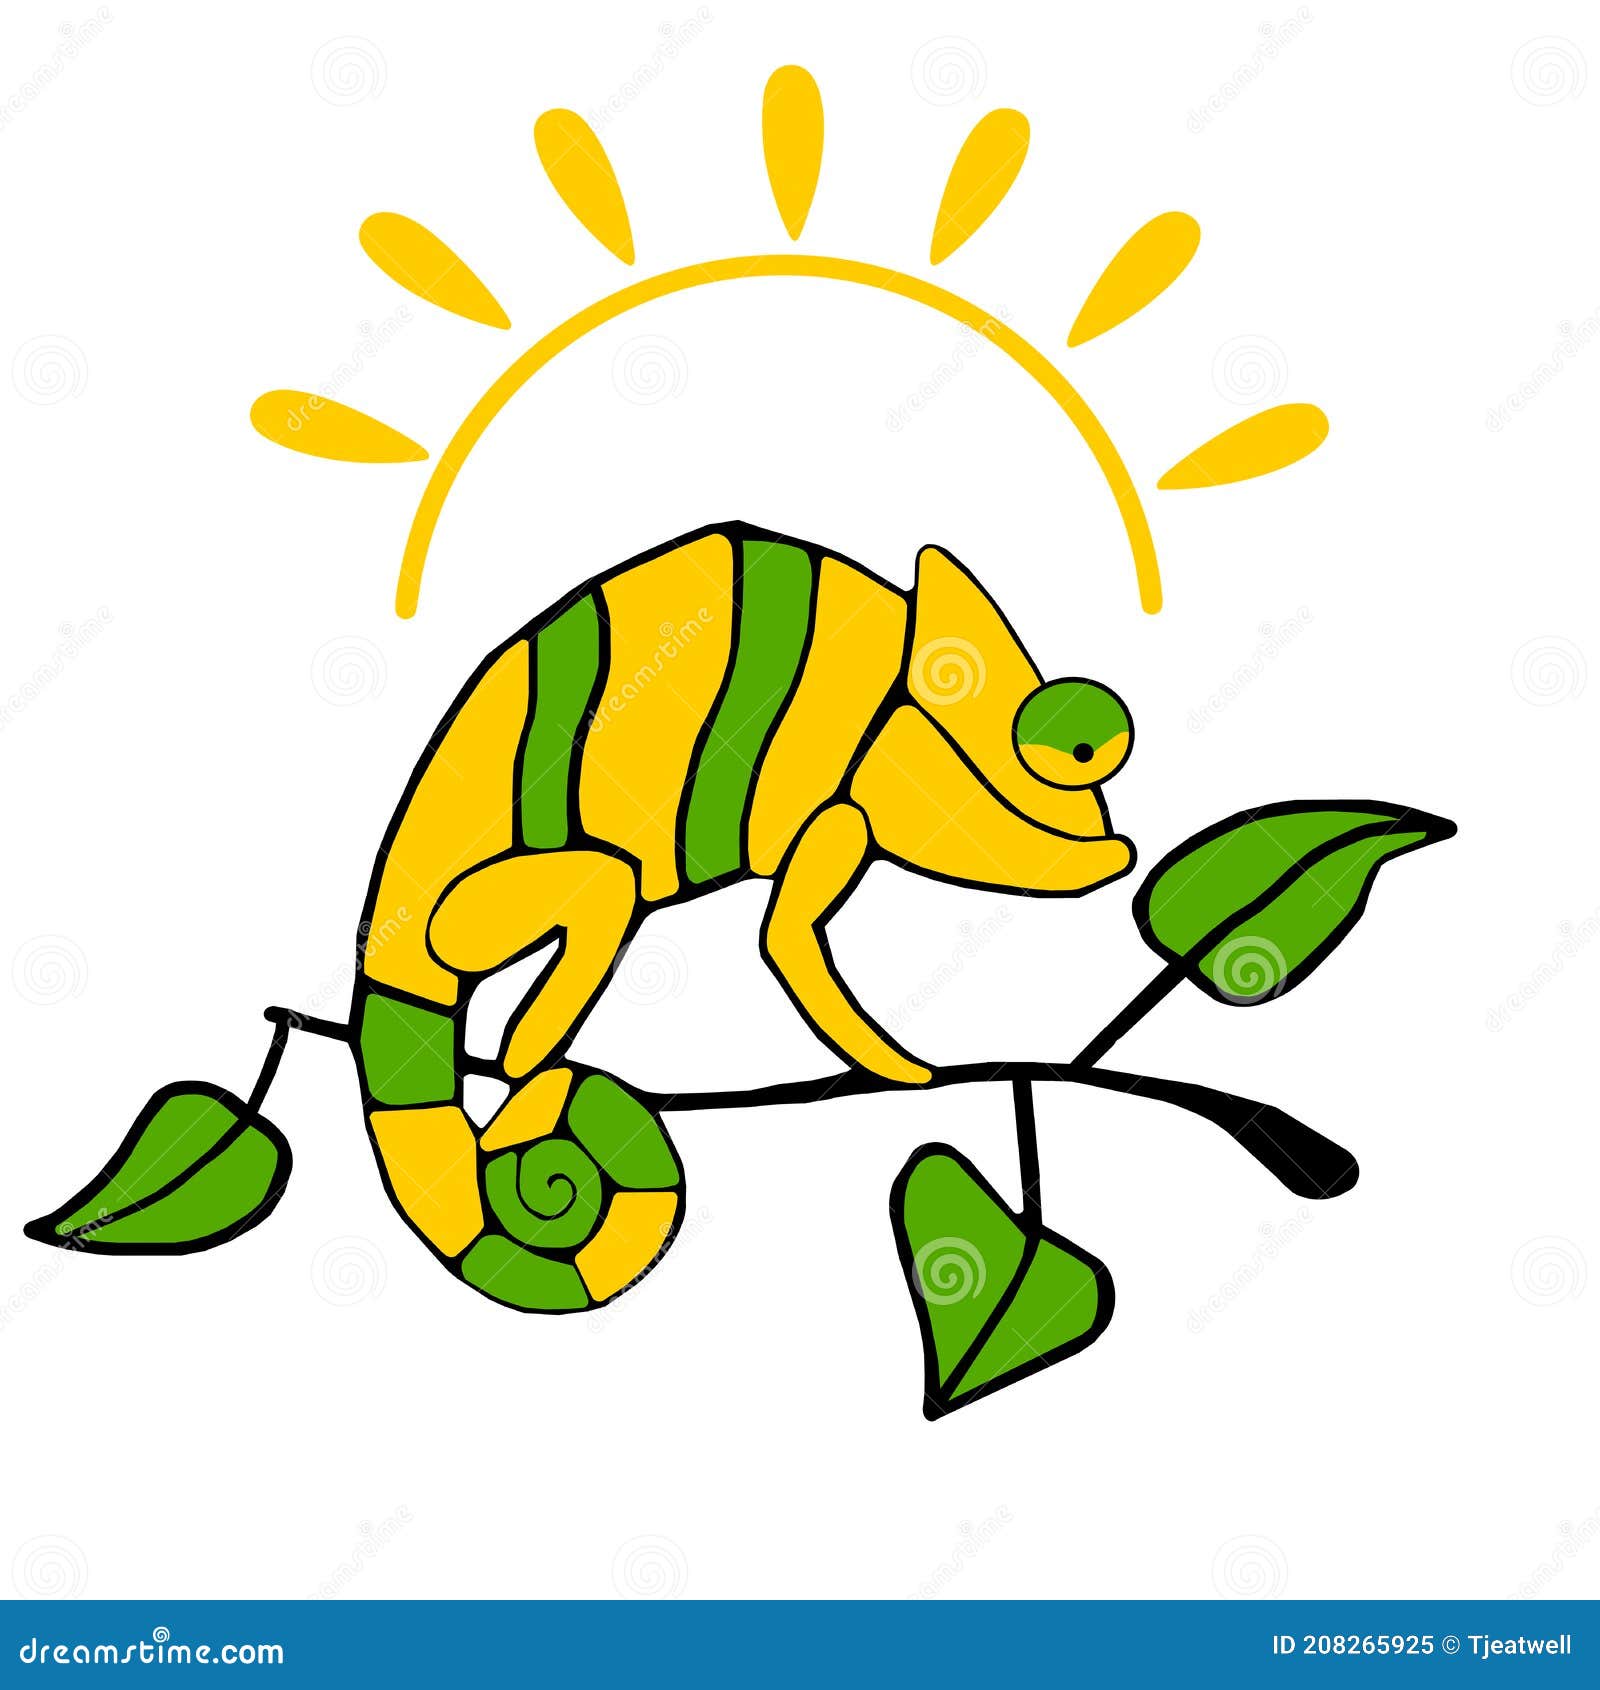 green and yellow sunny chameleon